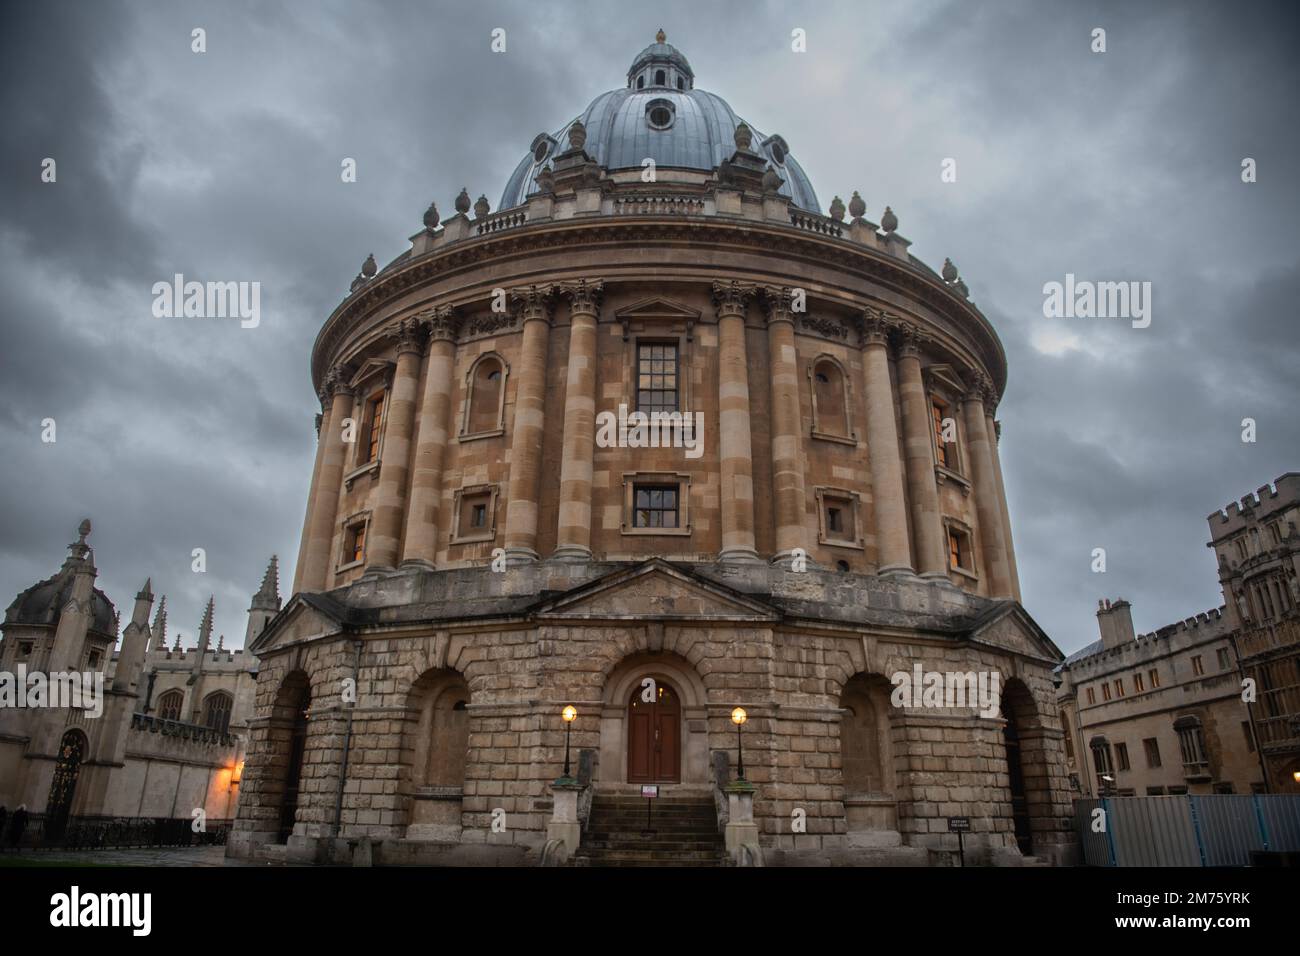 The Radcliffe Camera, a building of Oxford University, designed by James Gibbs in the neo-classical style. Stock Photo